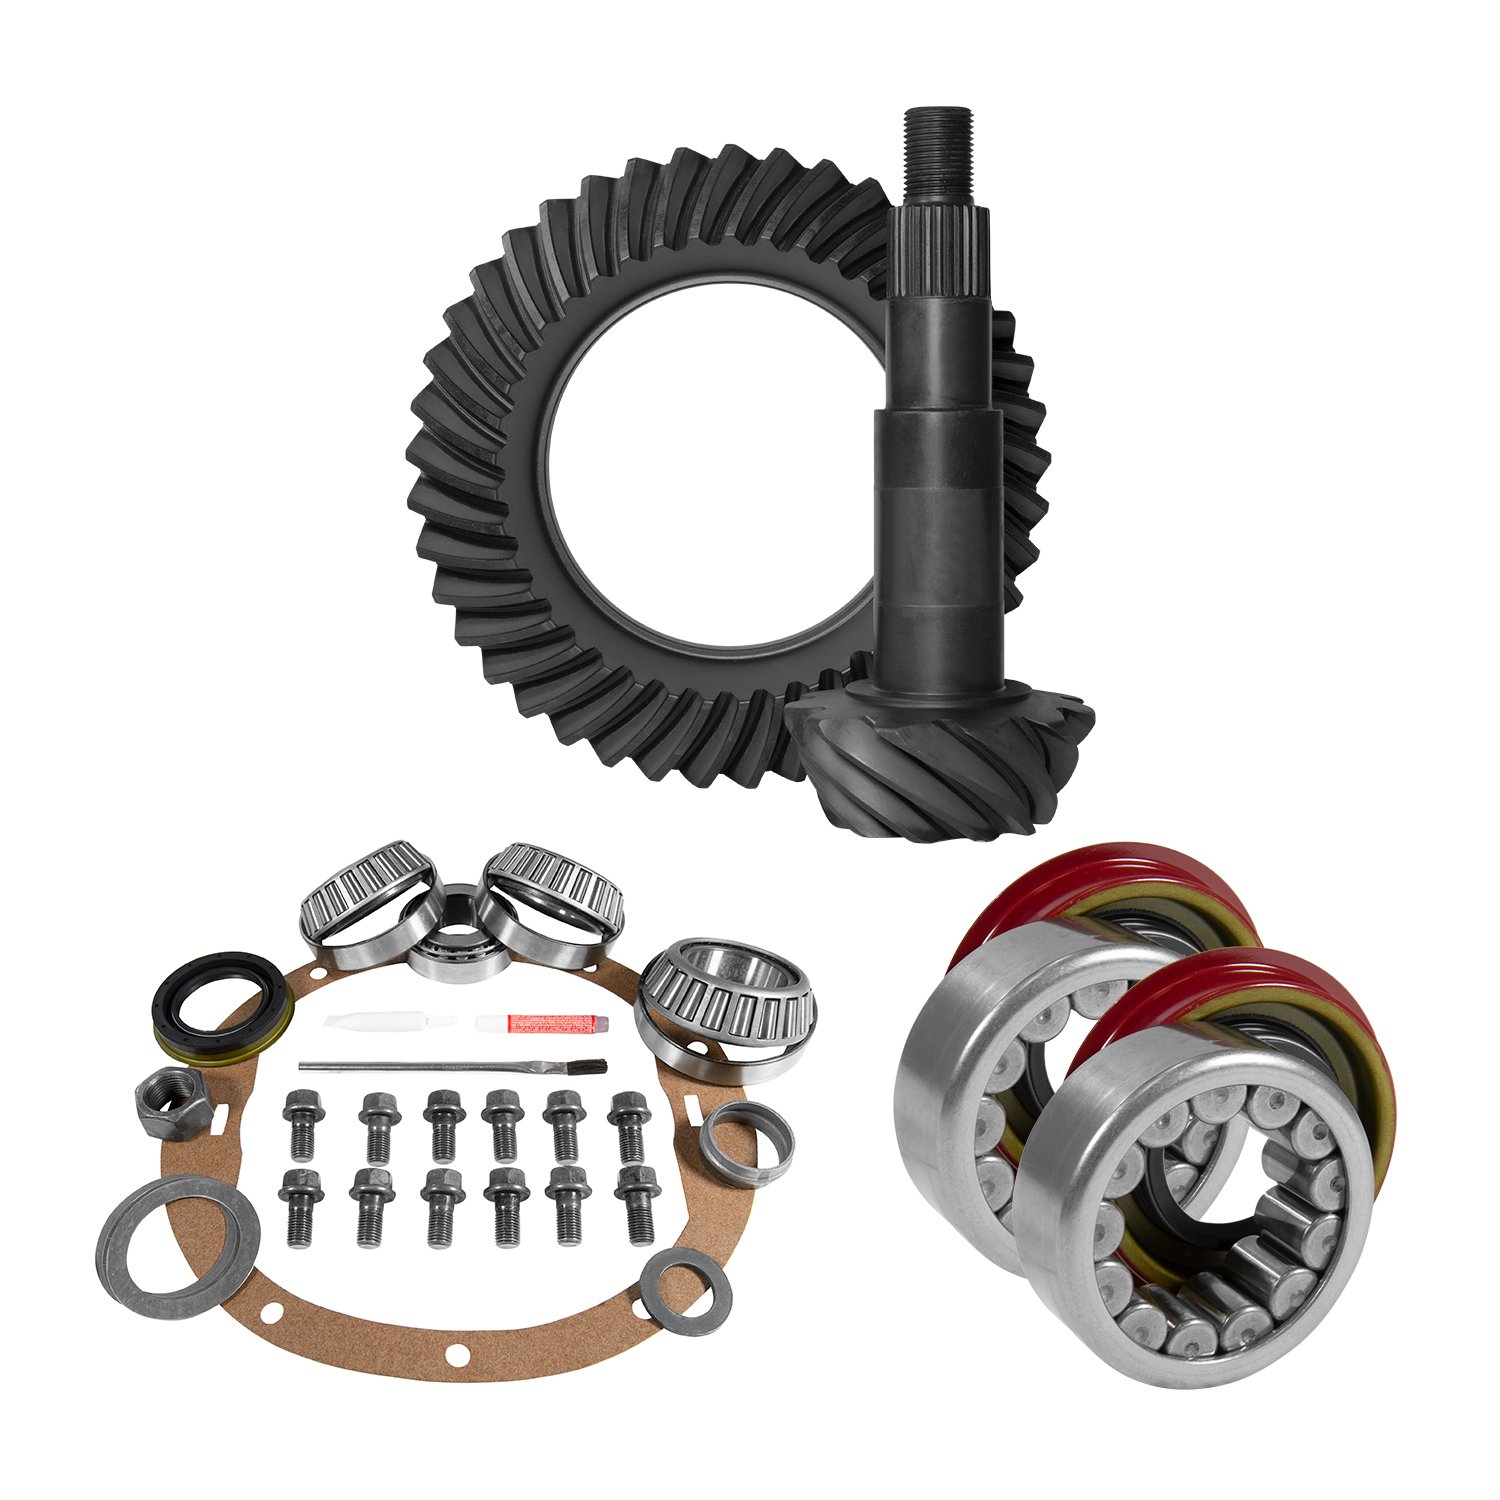 USA Standard 10718 8.5 in. GM 3.73 Rear Ring & Pinion Install Kit, Axle Bearings, 1.78 in. Case Journal